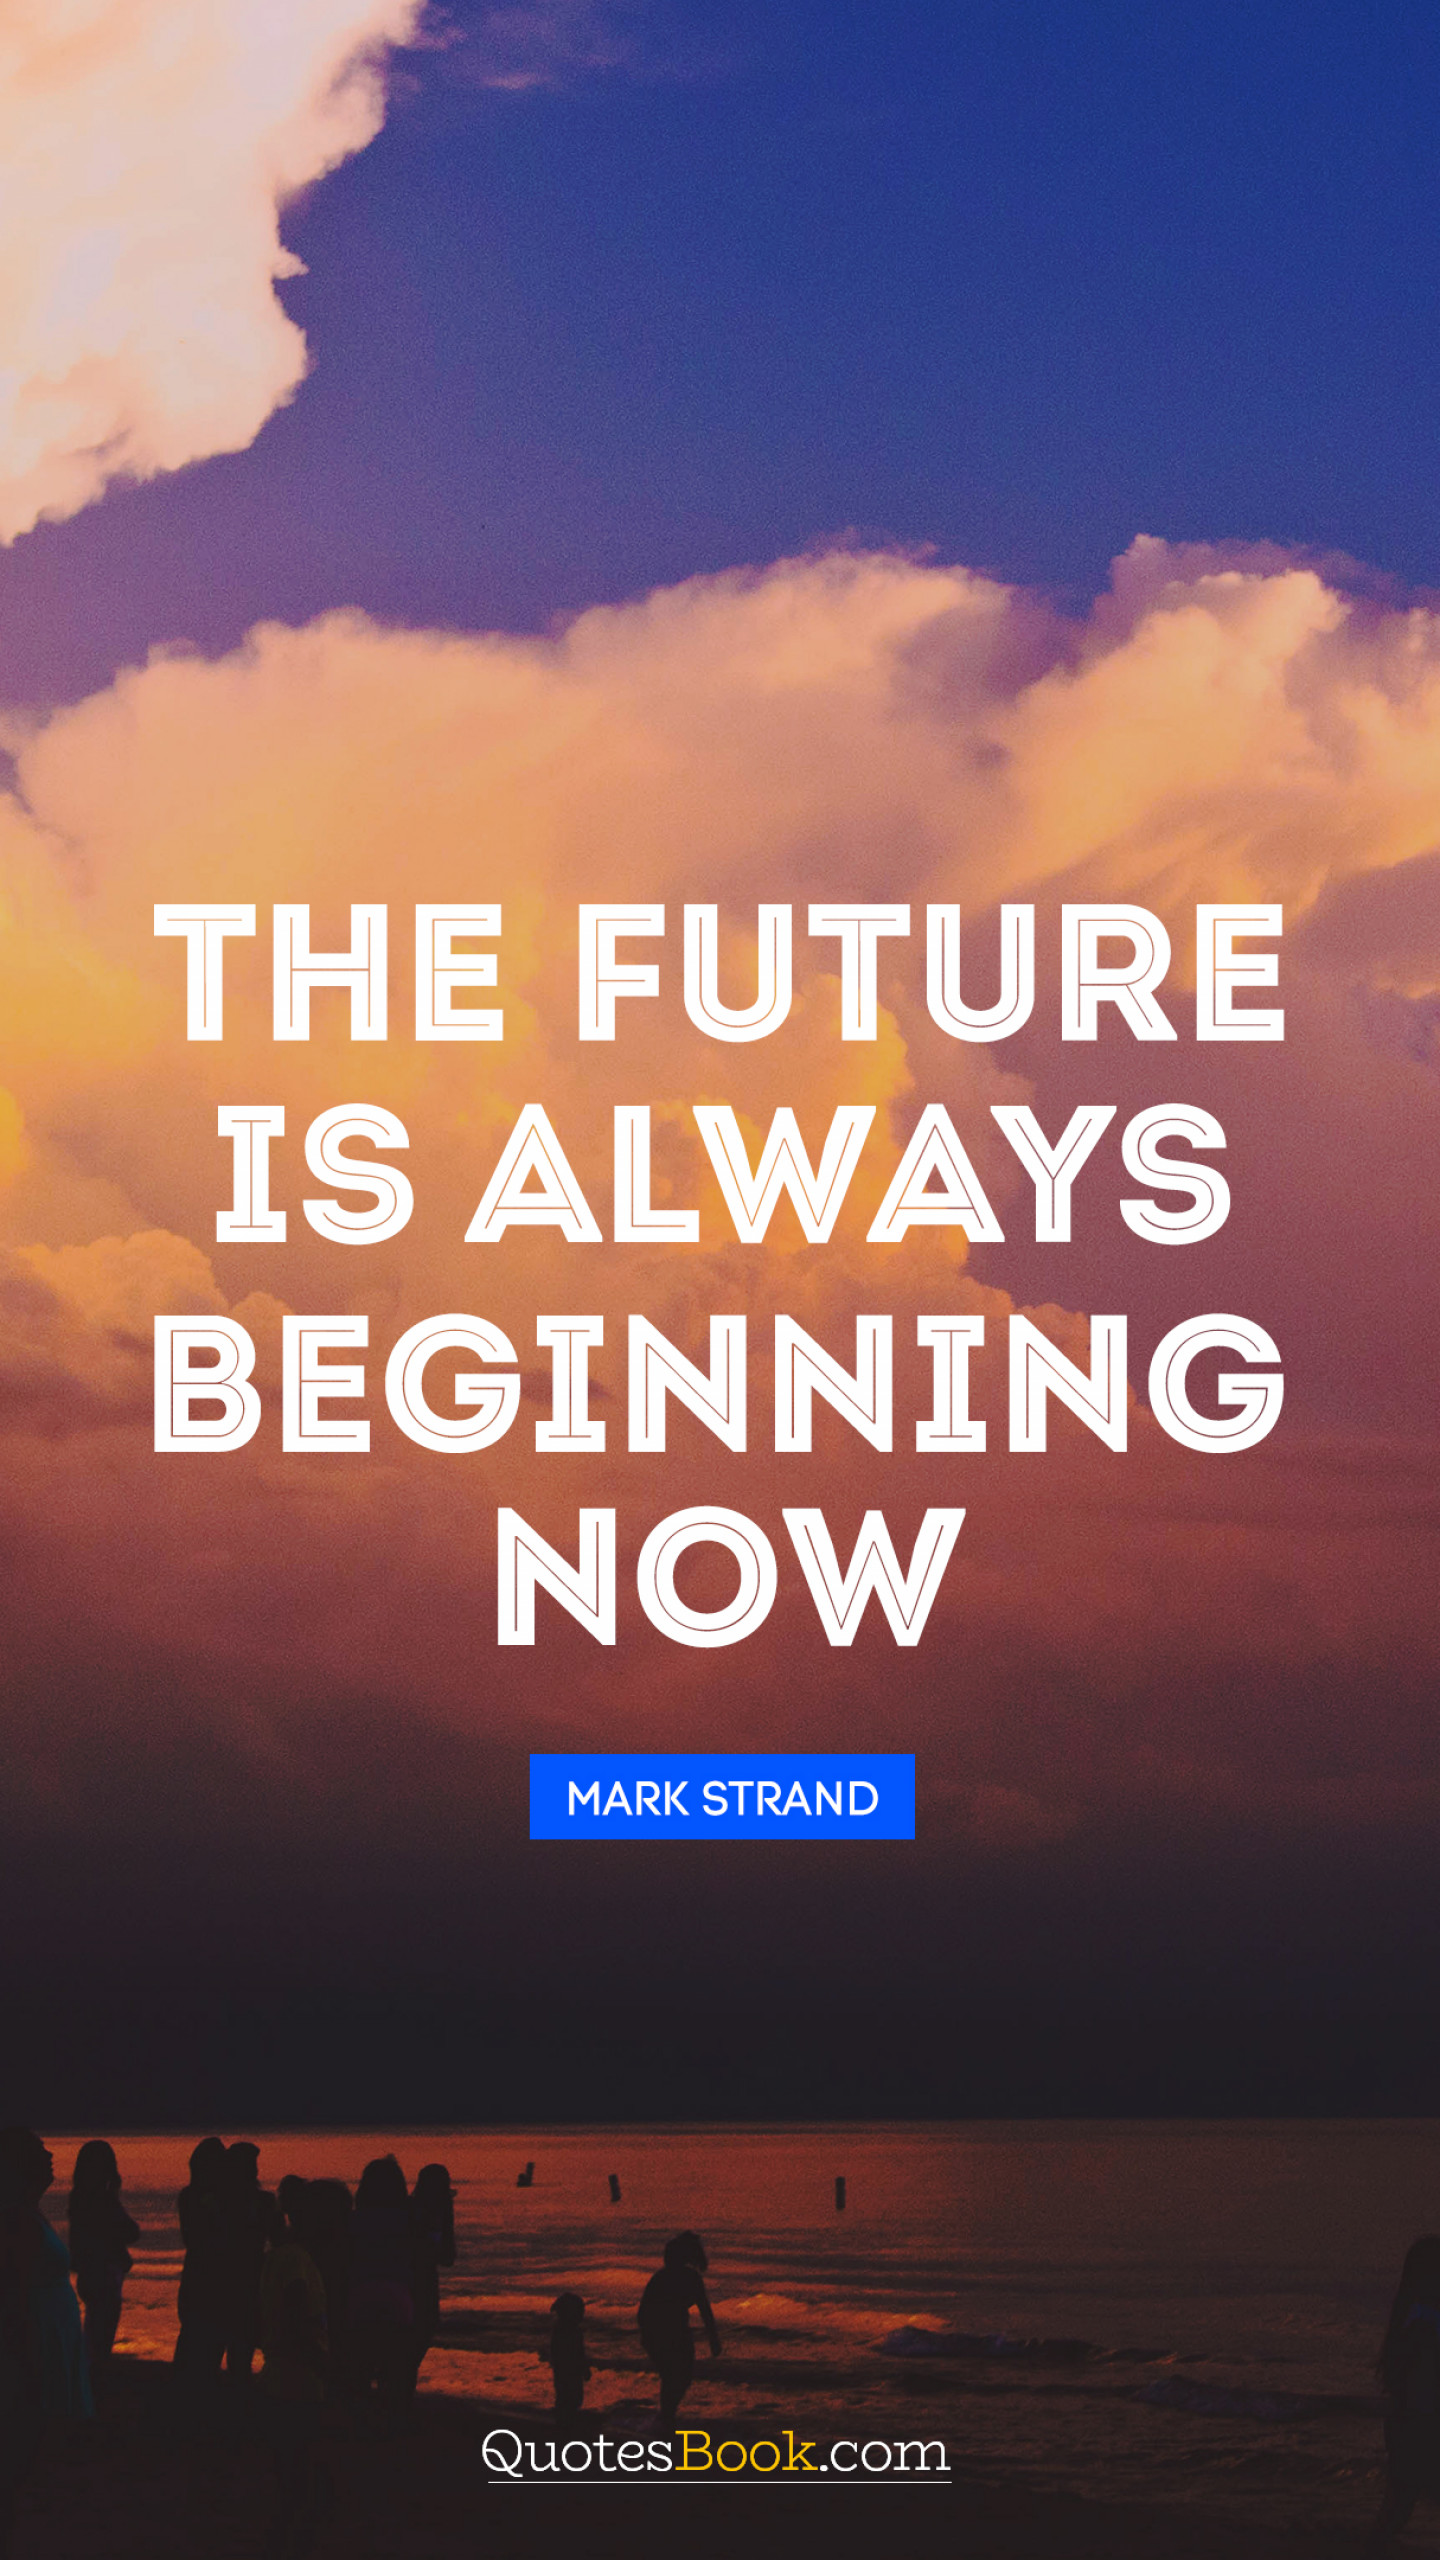 The future is always beginning now. - Quote by Mark Strand - QuotesBook